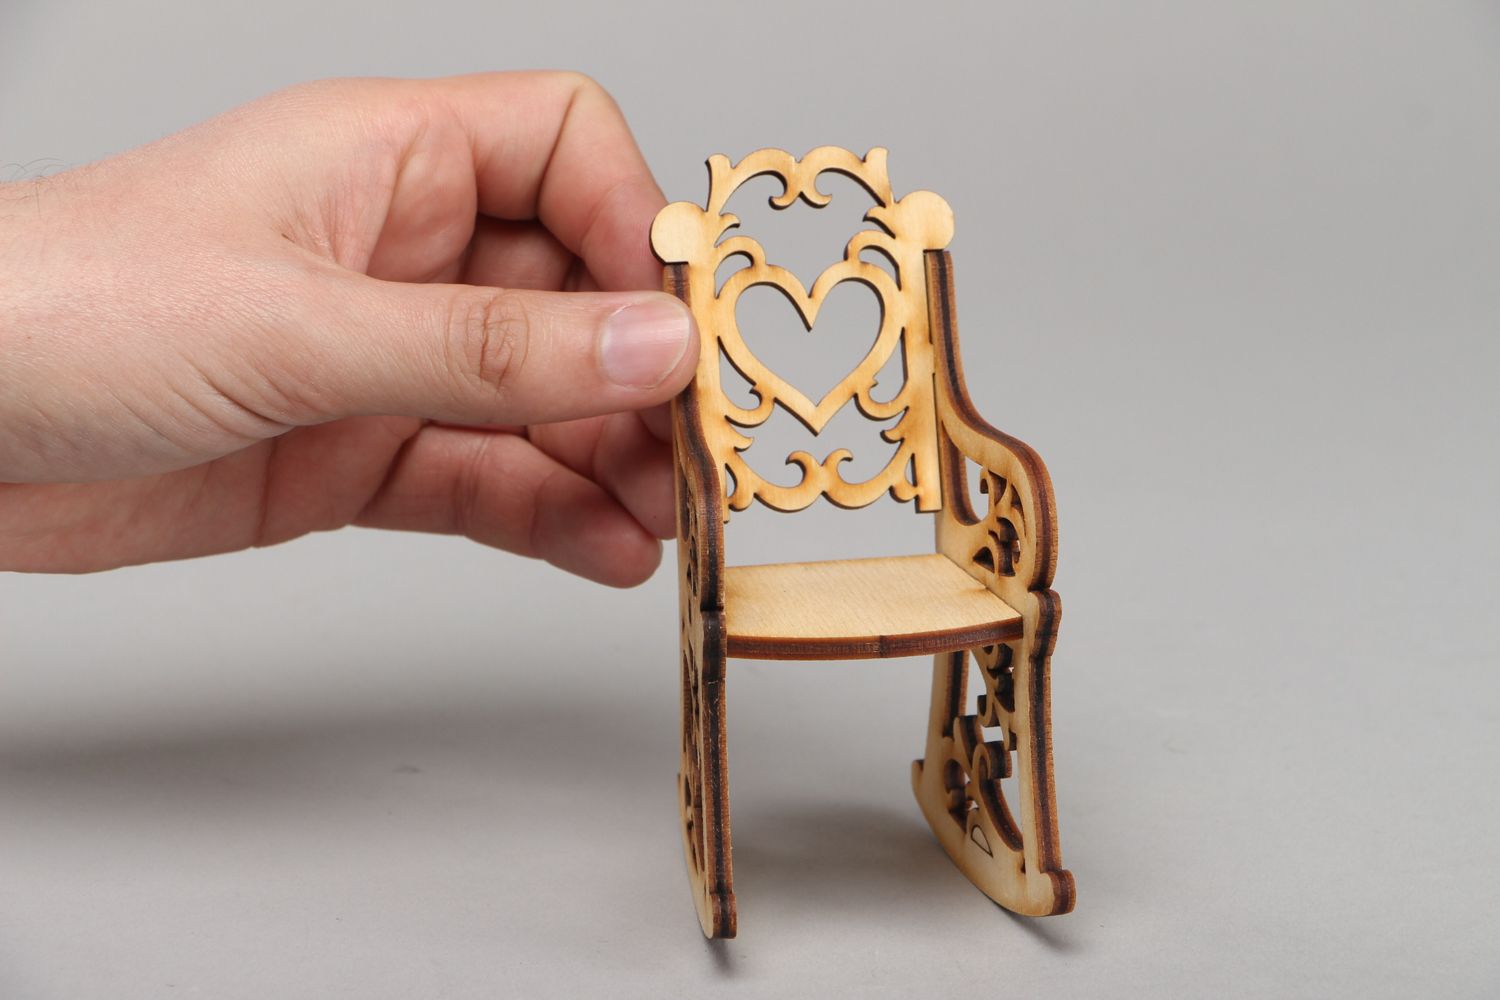 Plywood craft blank for toy arm chair photo 4